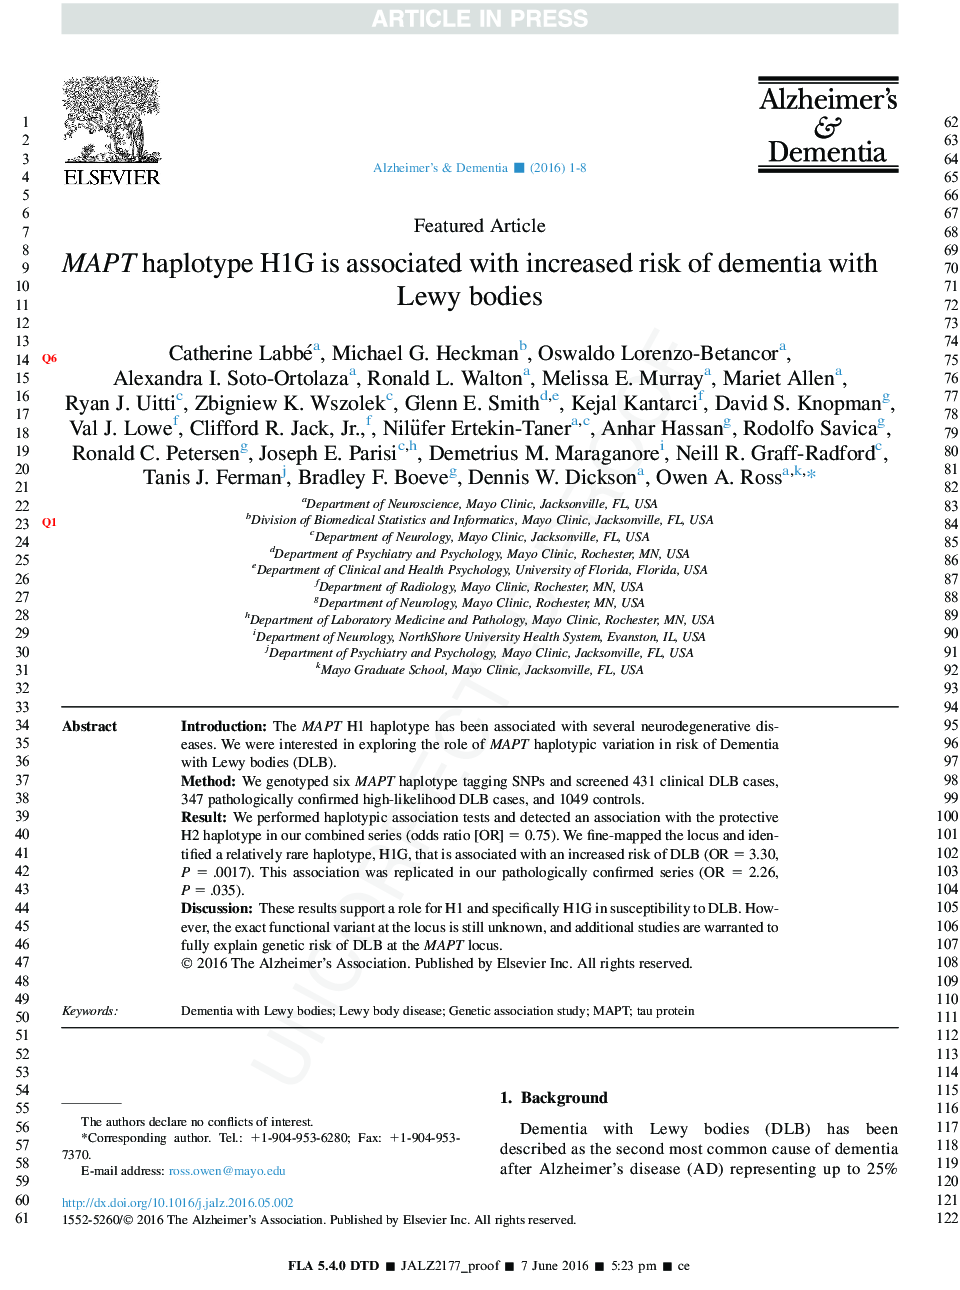 MAPT haplotype H1G is associated with increased risk of dementia with Lewy bodies